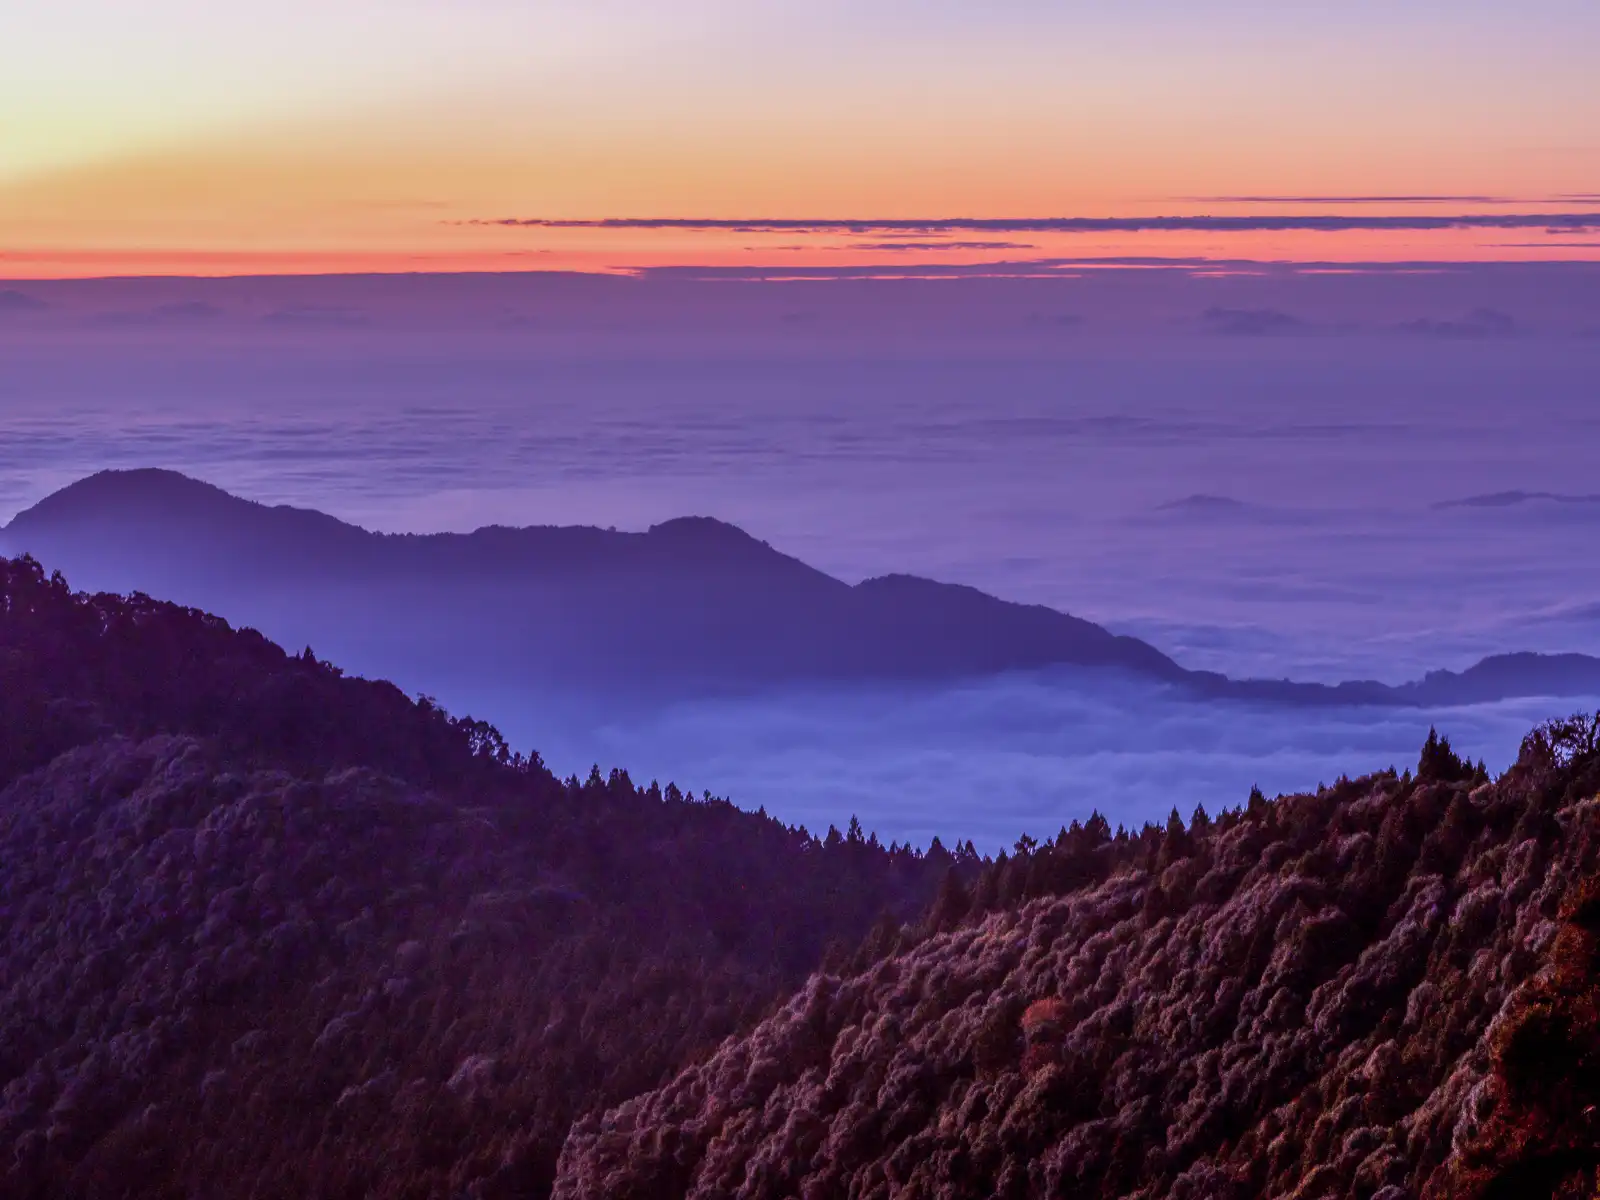 A vast sea of clouds reaches towards the horizon which is still illuminated in an orange post-sunset glow.